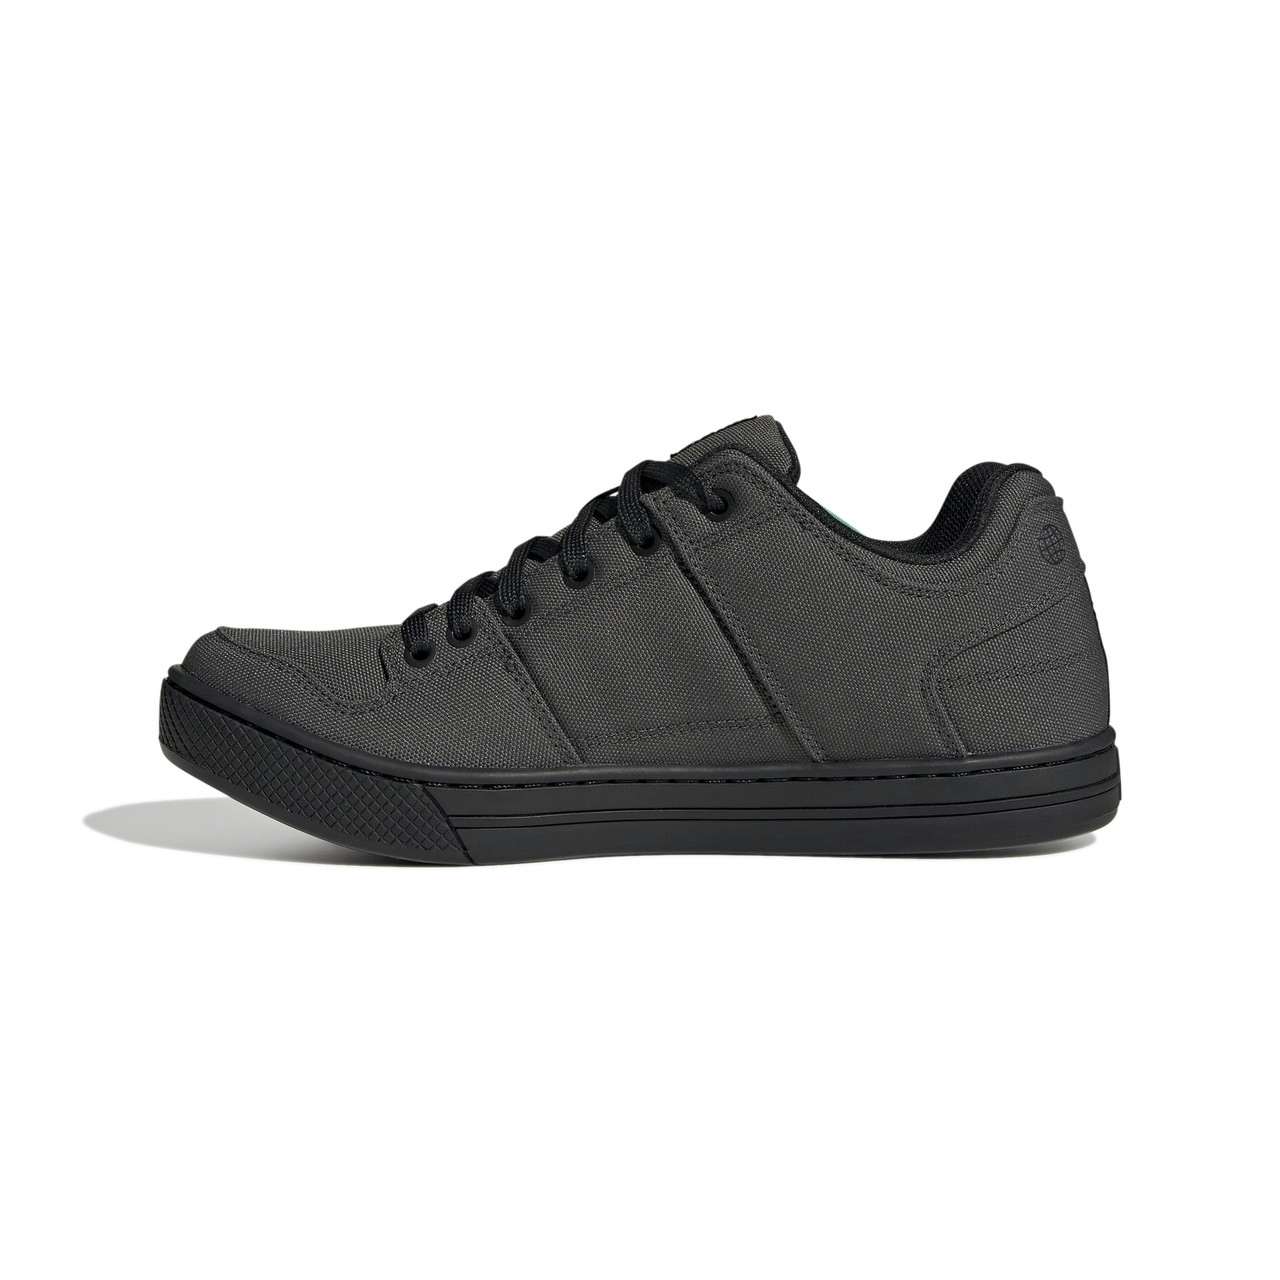 Freerider Canvas Cycling Shoes DGH Solid Grey/Core Black